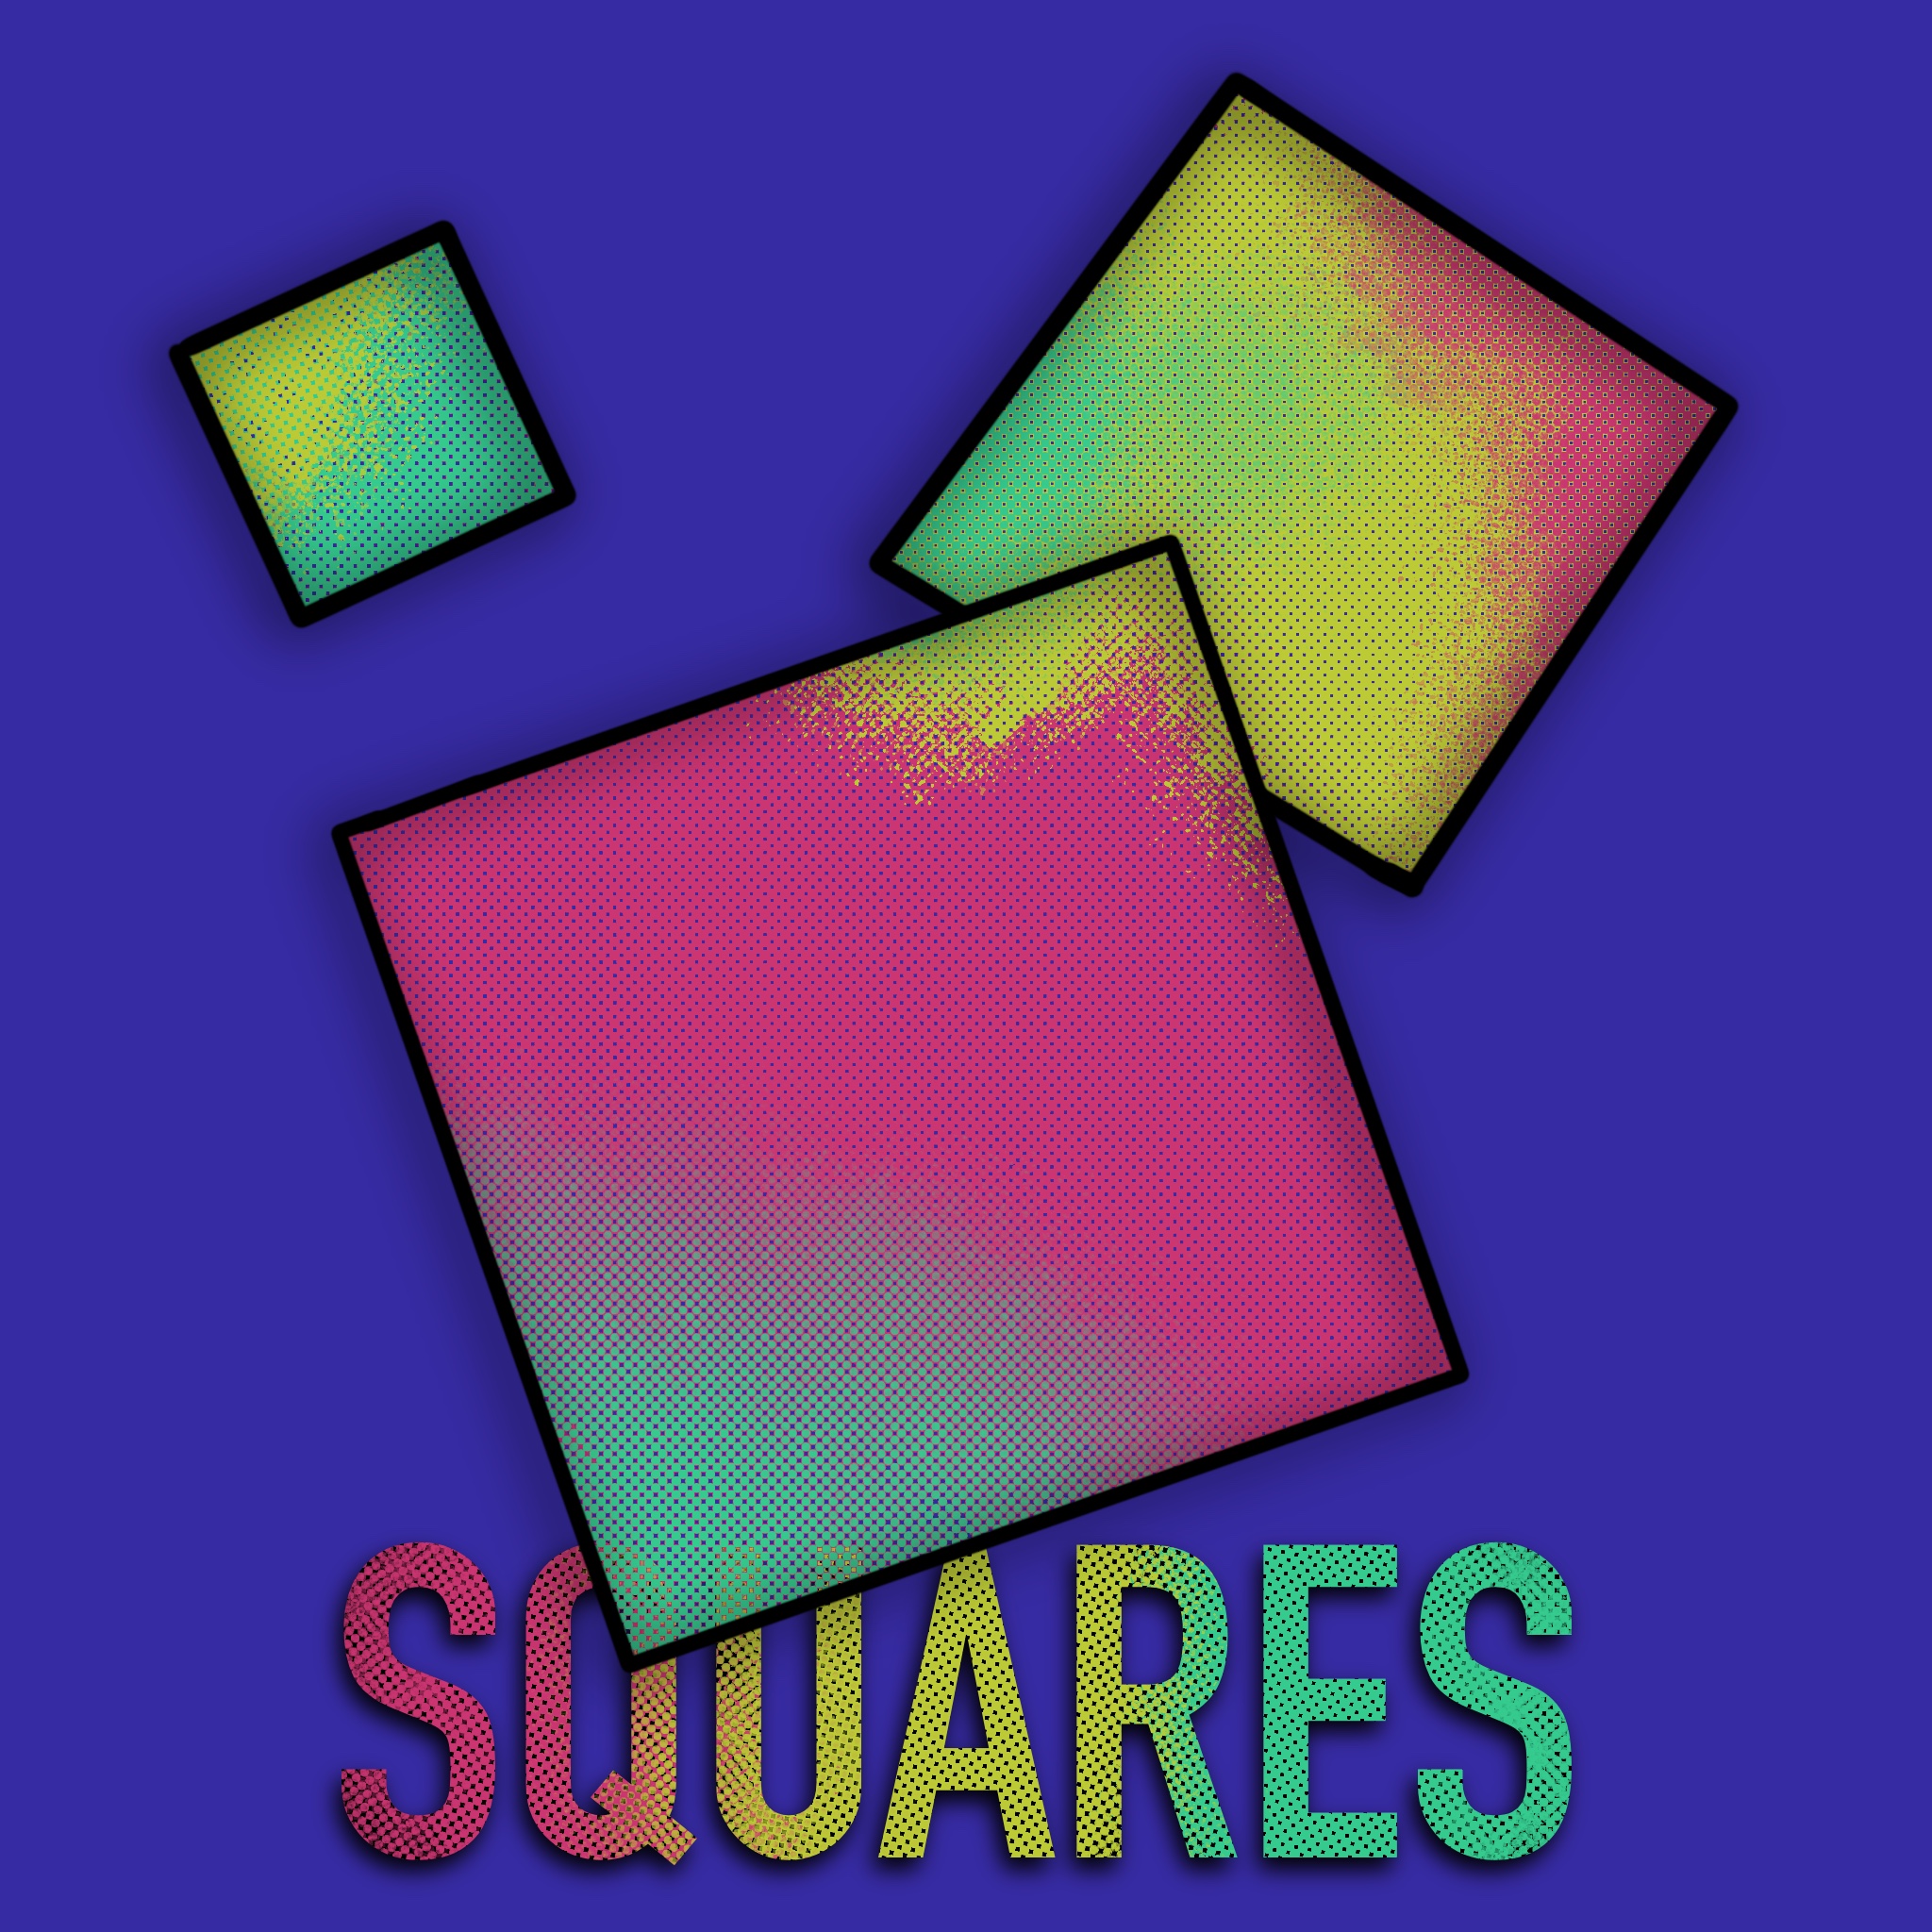 Squares with the colors yellow, mint green, blue, and pink.